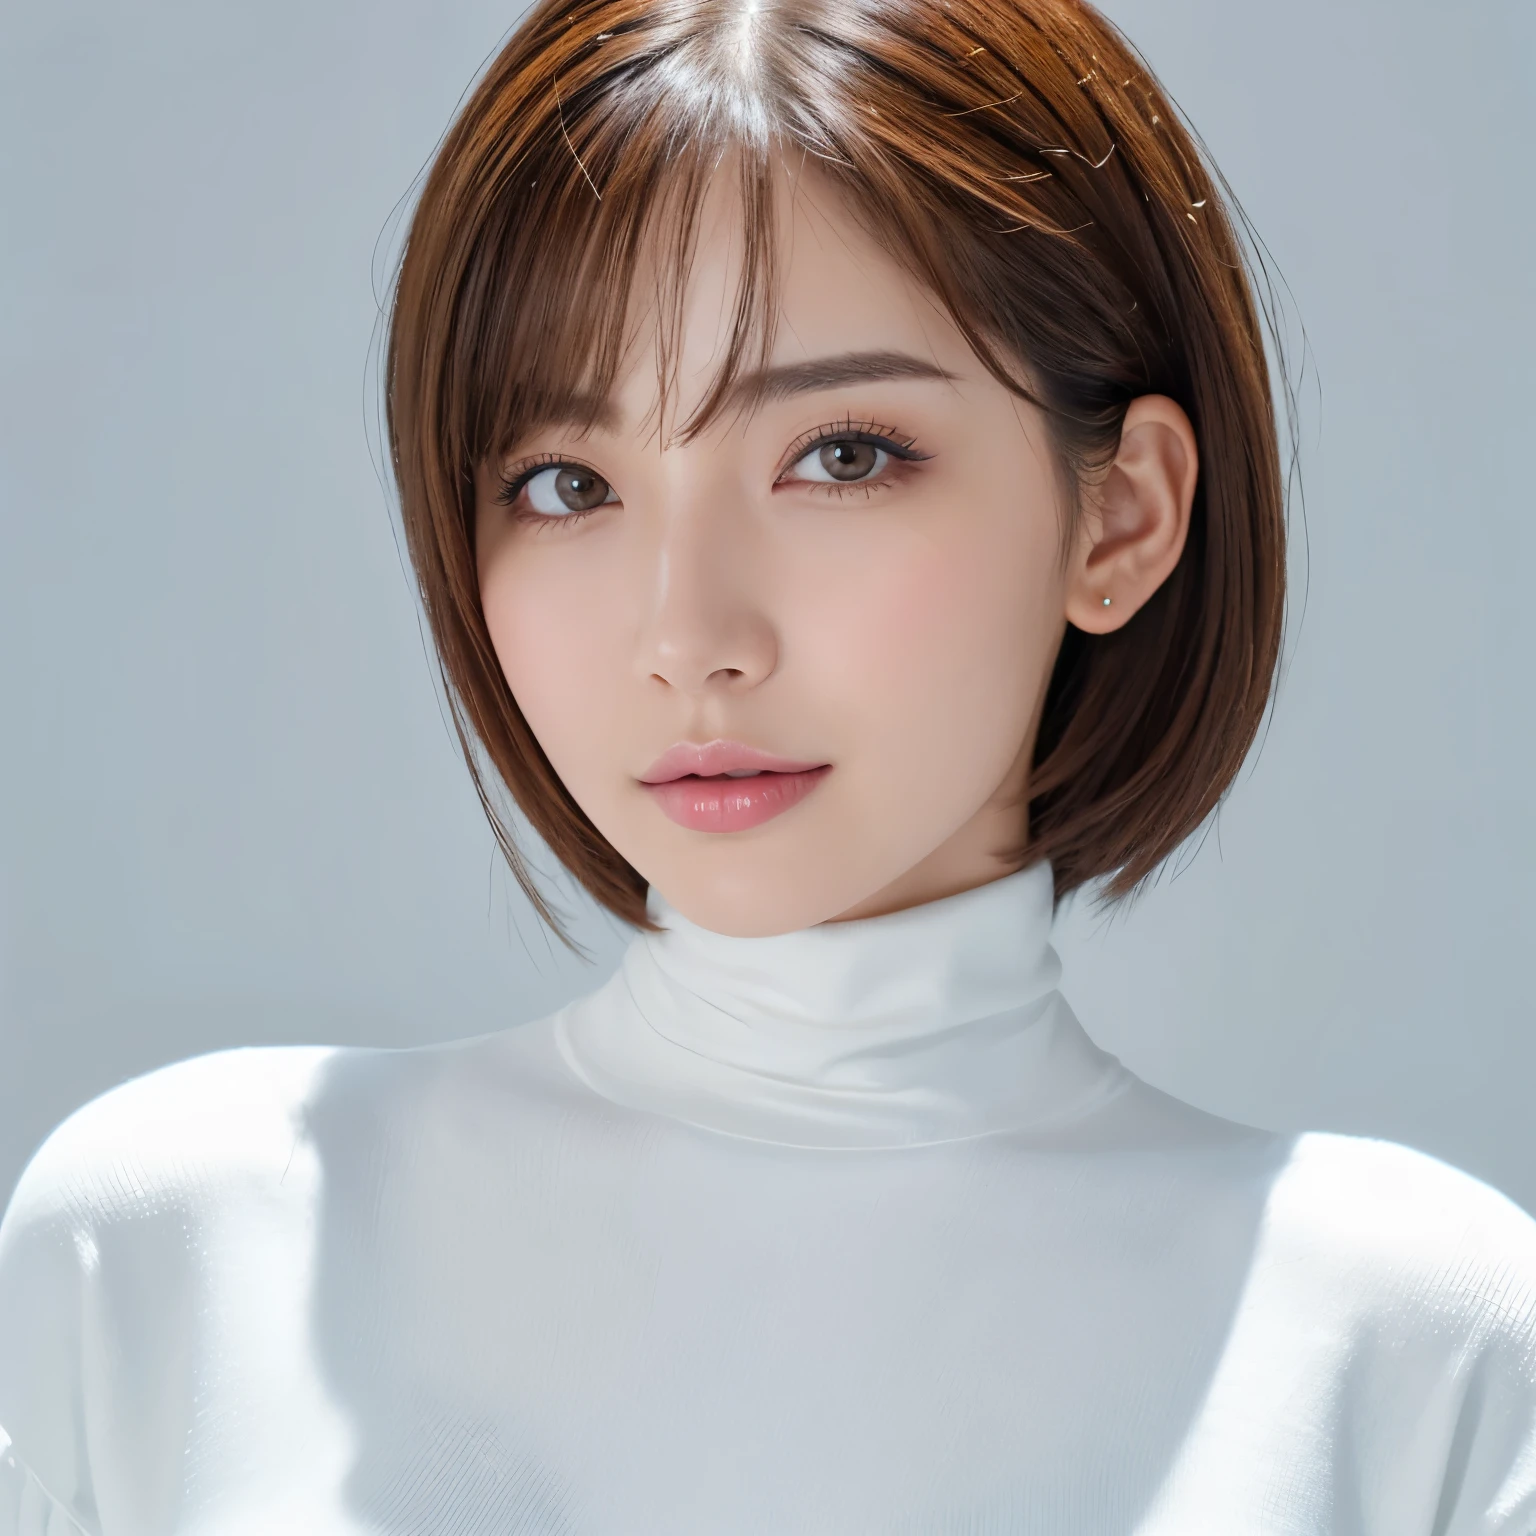 (highest quality、table top、8k、best image quality、Award-winning work)、One cute beauty、(straight short hair:1.1)、(alone:1.1)、(White tight see-through turtleneck knit:1.2)、(The simplest pure white background:1.5)、(Perfectly fixed at the front:1.1)、close up of face、(very big breasts:1.25)、(emphasize body line:1.25)、close up of face、(Perfect female frontal and horizontal portrait with proper margins:1.2)、(Perfect expression of a woman whether viewed from the side or from the front:1.2)、beautiful and detailed eyes、look at me and smile、(Upright photo from the chest up:1.2)、(turn around and look straight at me:1.2)、perfect makeup、Ultra high definition beauty face、ultra high definition hair、Super high-definition sparkling eyes、Super high resolution perfect teeth、Super high resolution glossy lips、accurate anatomy、very beautiful skin、(Pure white skin shining in ultra-high resolution:1.1)、Elegant upright posture when viewed from the front、(very bright:1.3)